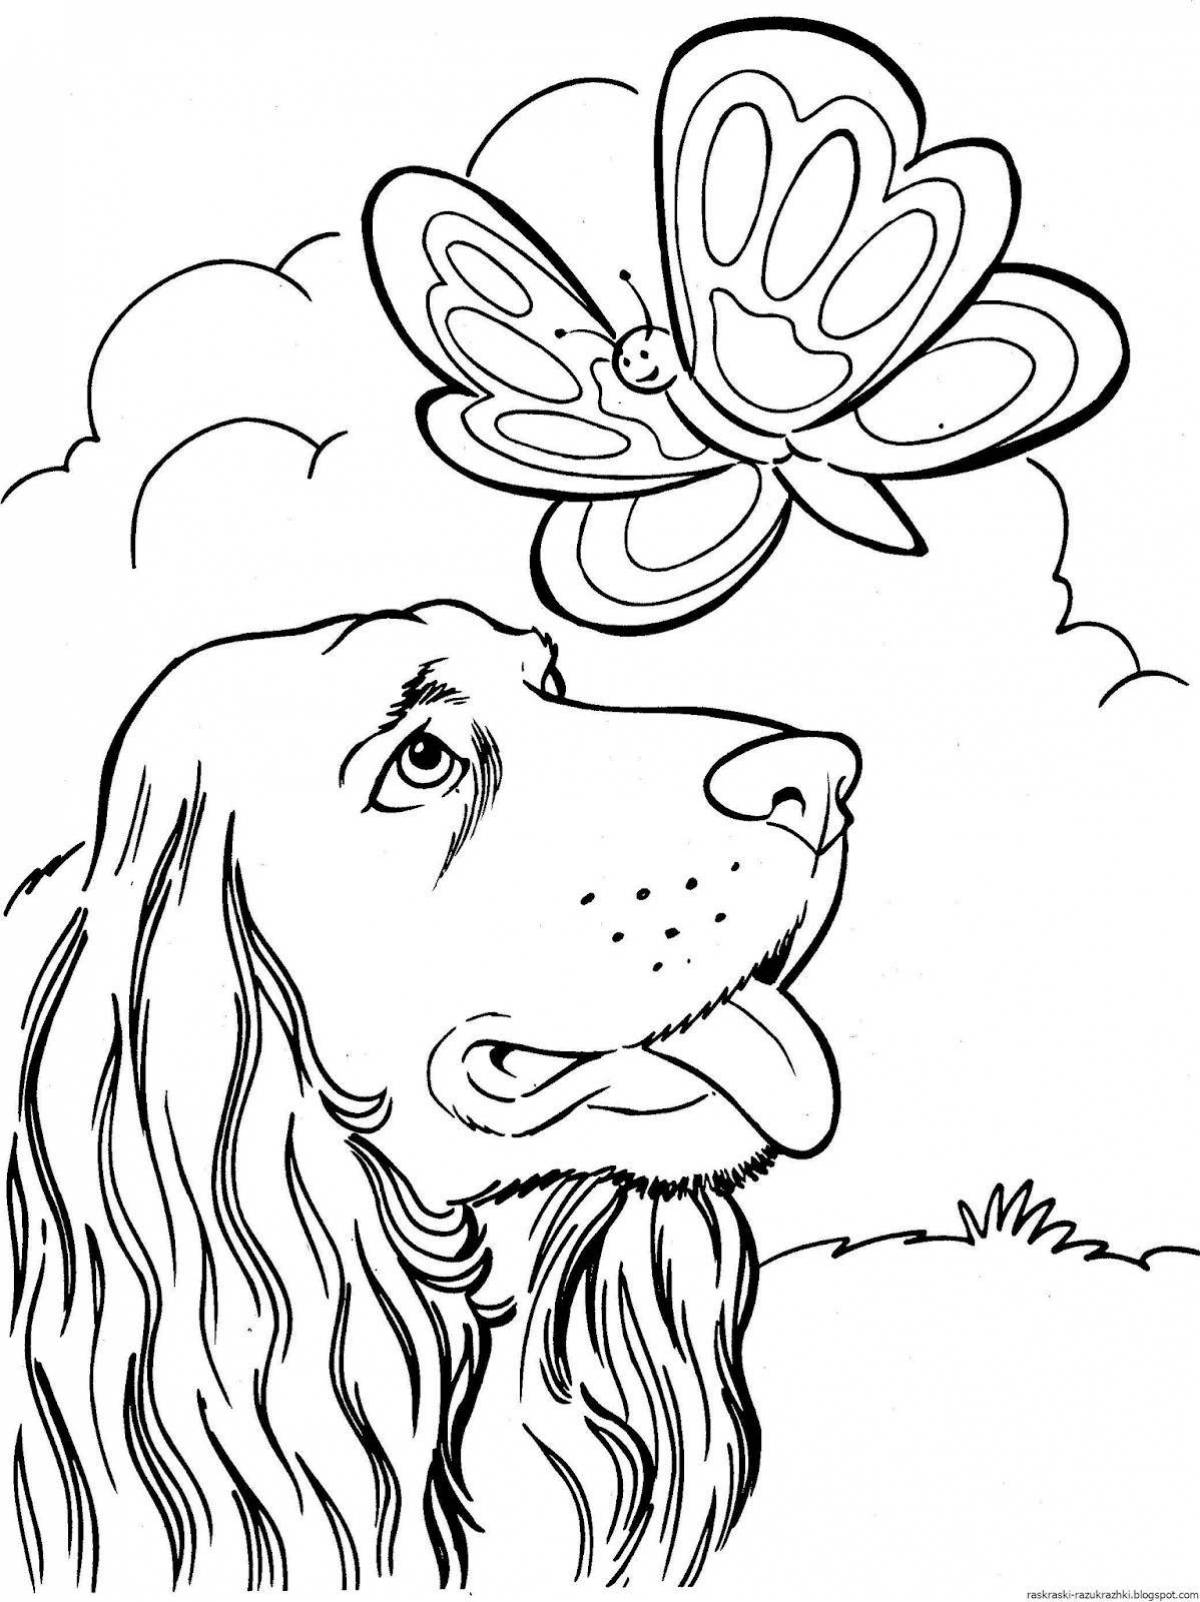 Funny coloring for girls 12 years old animals